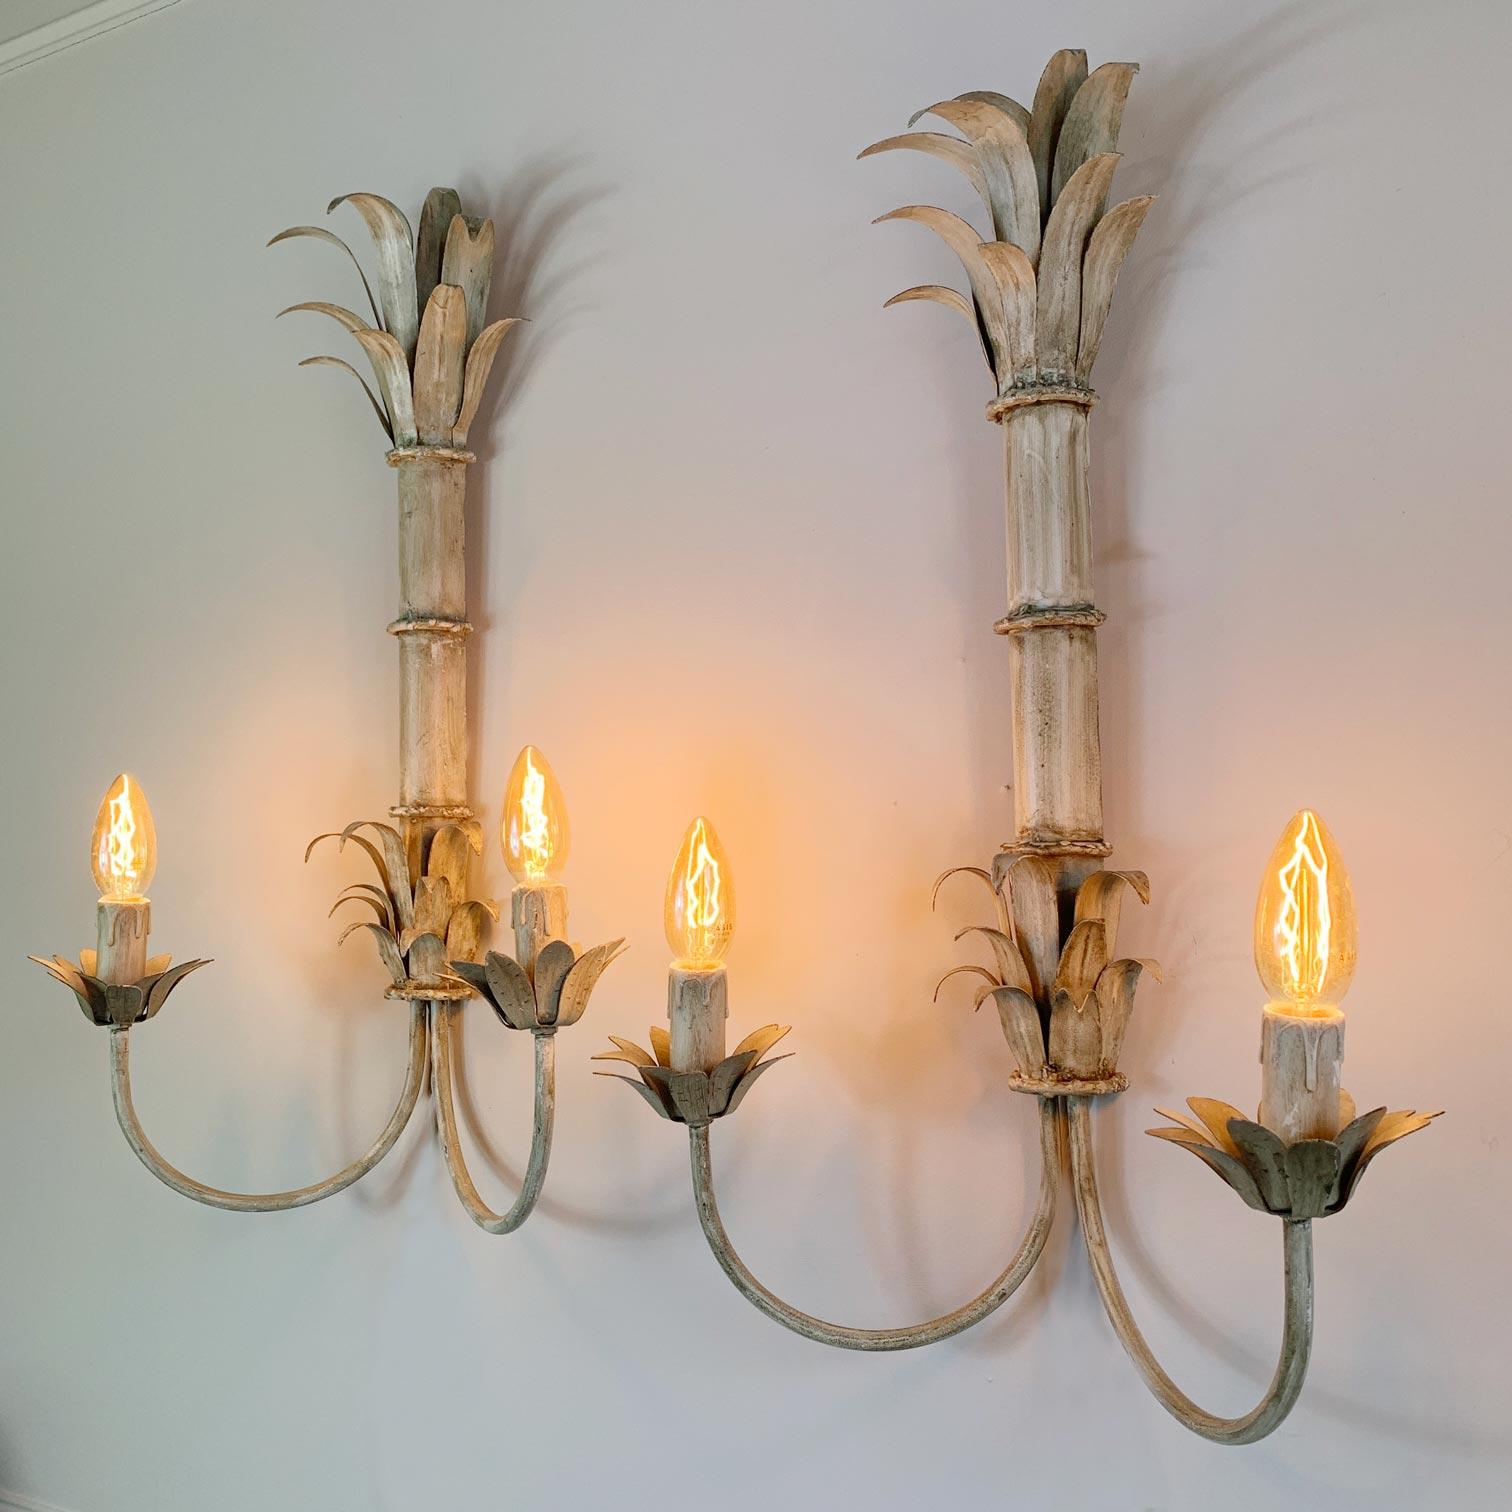 A statement pair of French toleware Palm Reed wall sconces, circa 1970s. Fabulous large sized sconces depicting faux bamboo reed stems with crowning palm fronds.The soft off white tone is original to the lamps.The lamps take an E14 bulb to each arm